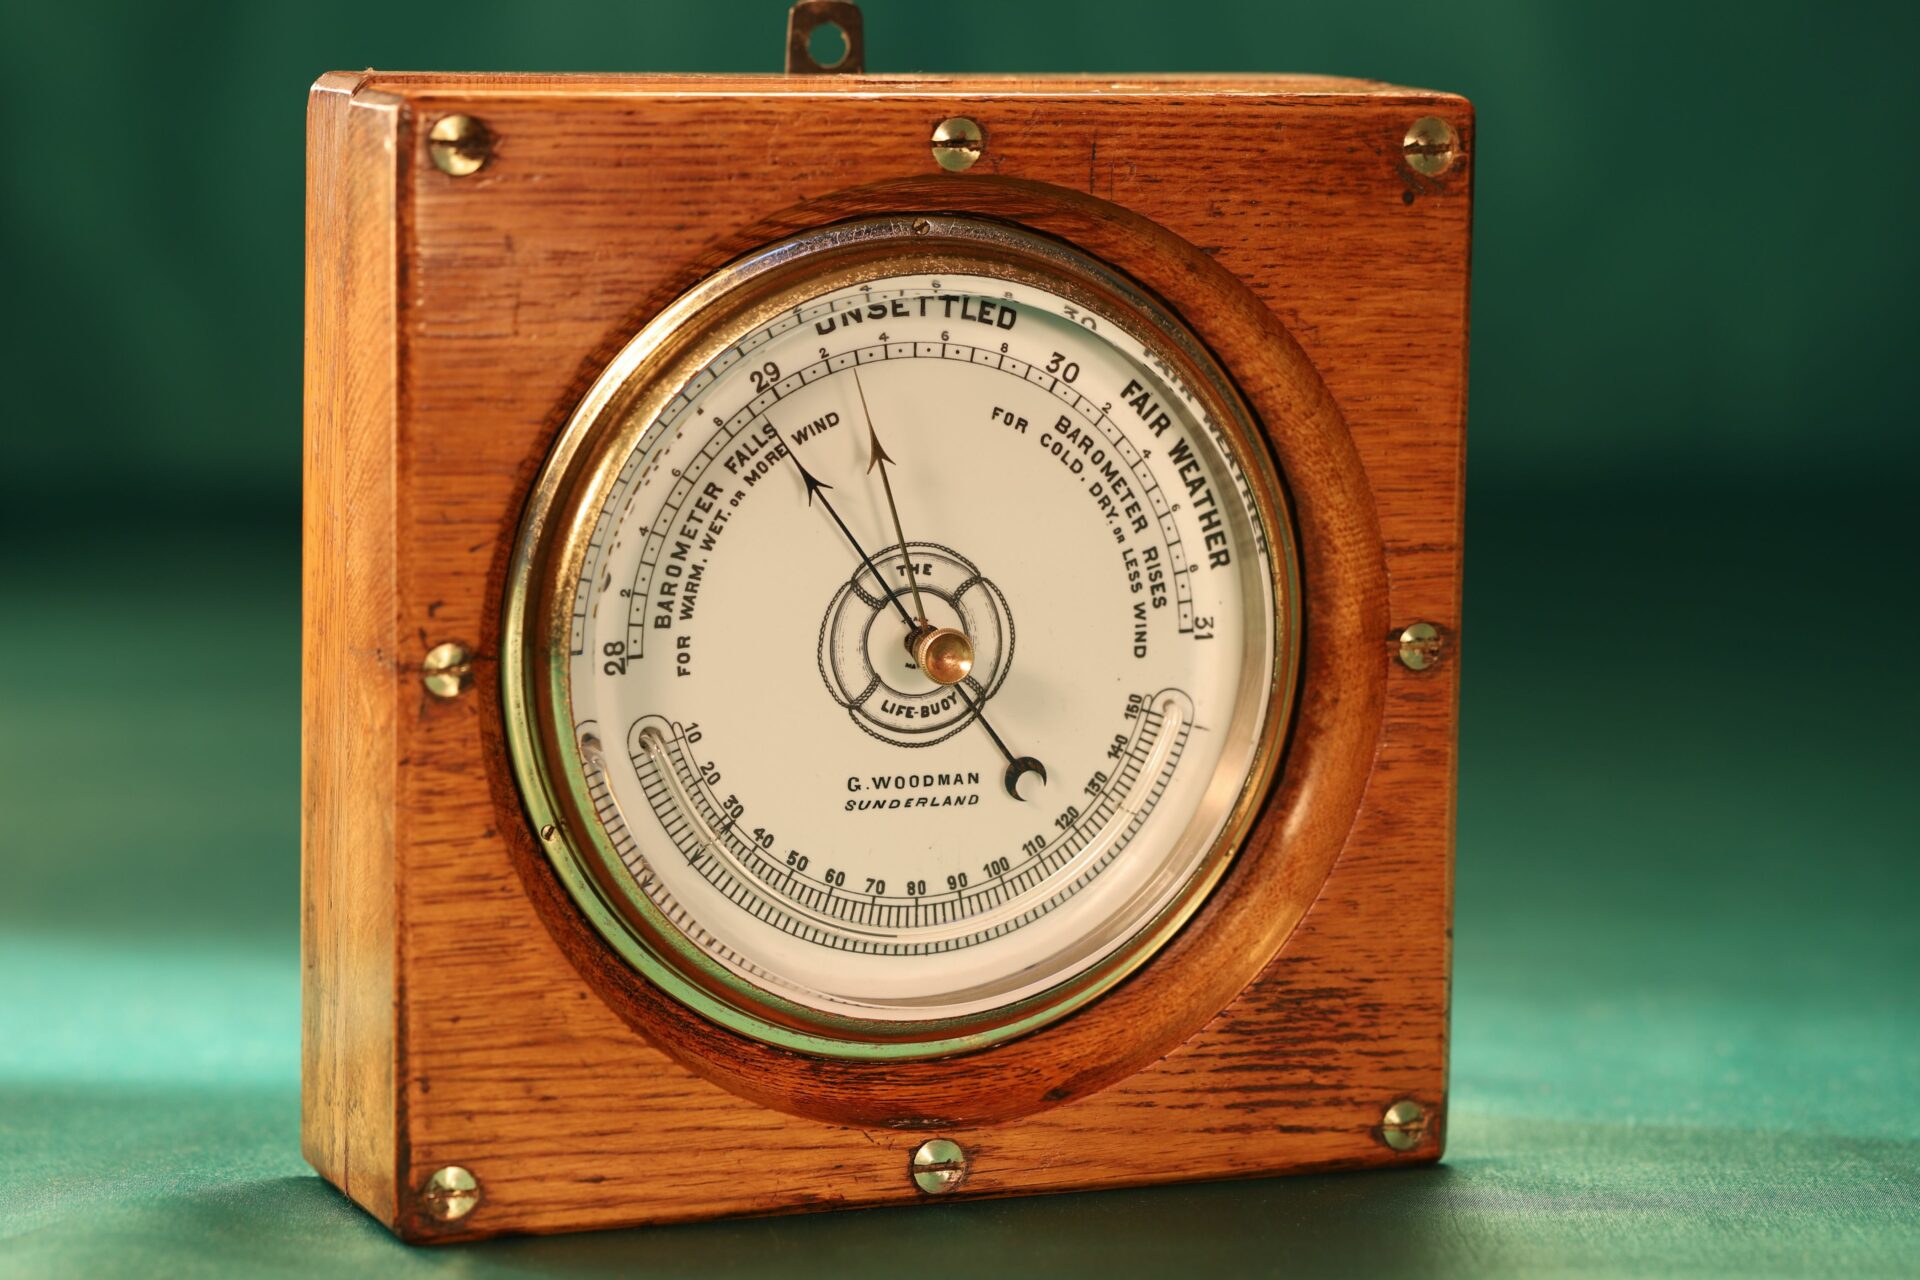 The Life-Buoy Barometer by Dollond c1885